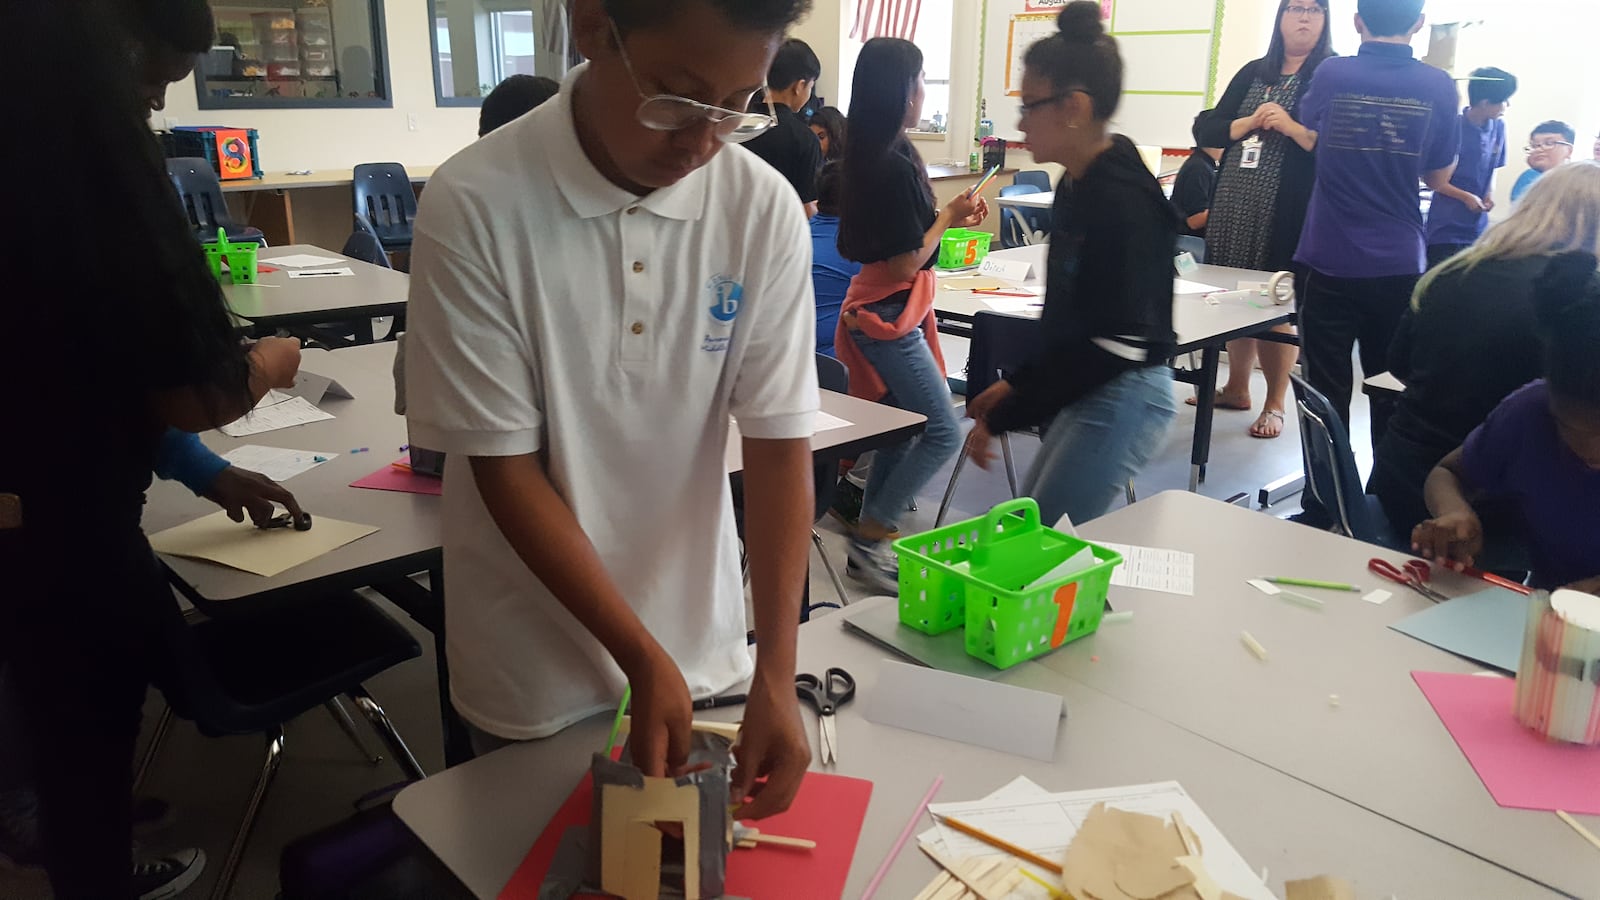 Students at Aurora Hills Middle School work on creating huts in their STEM class. (Photo by Yesenia Robles, Chalkbeat)